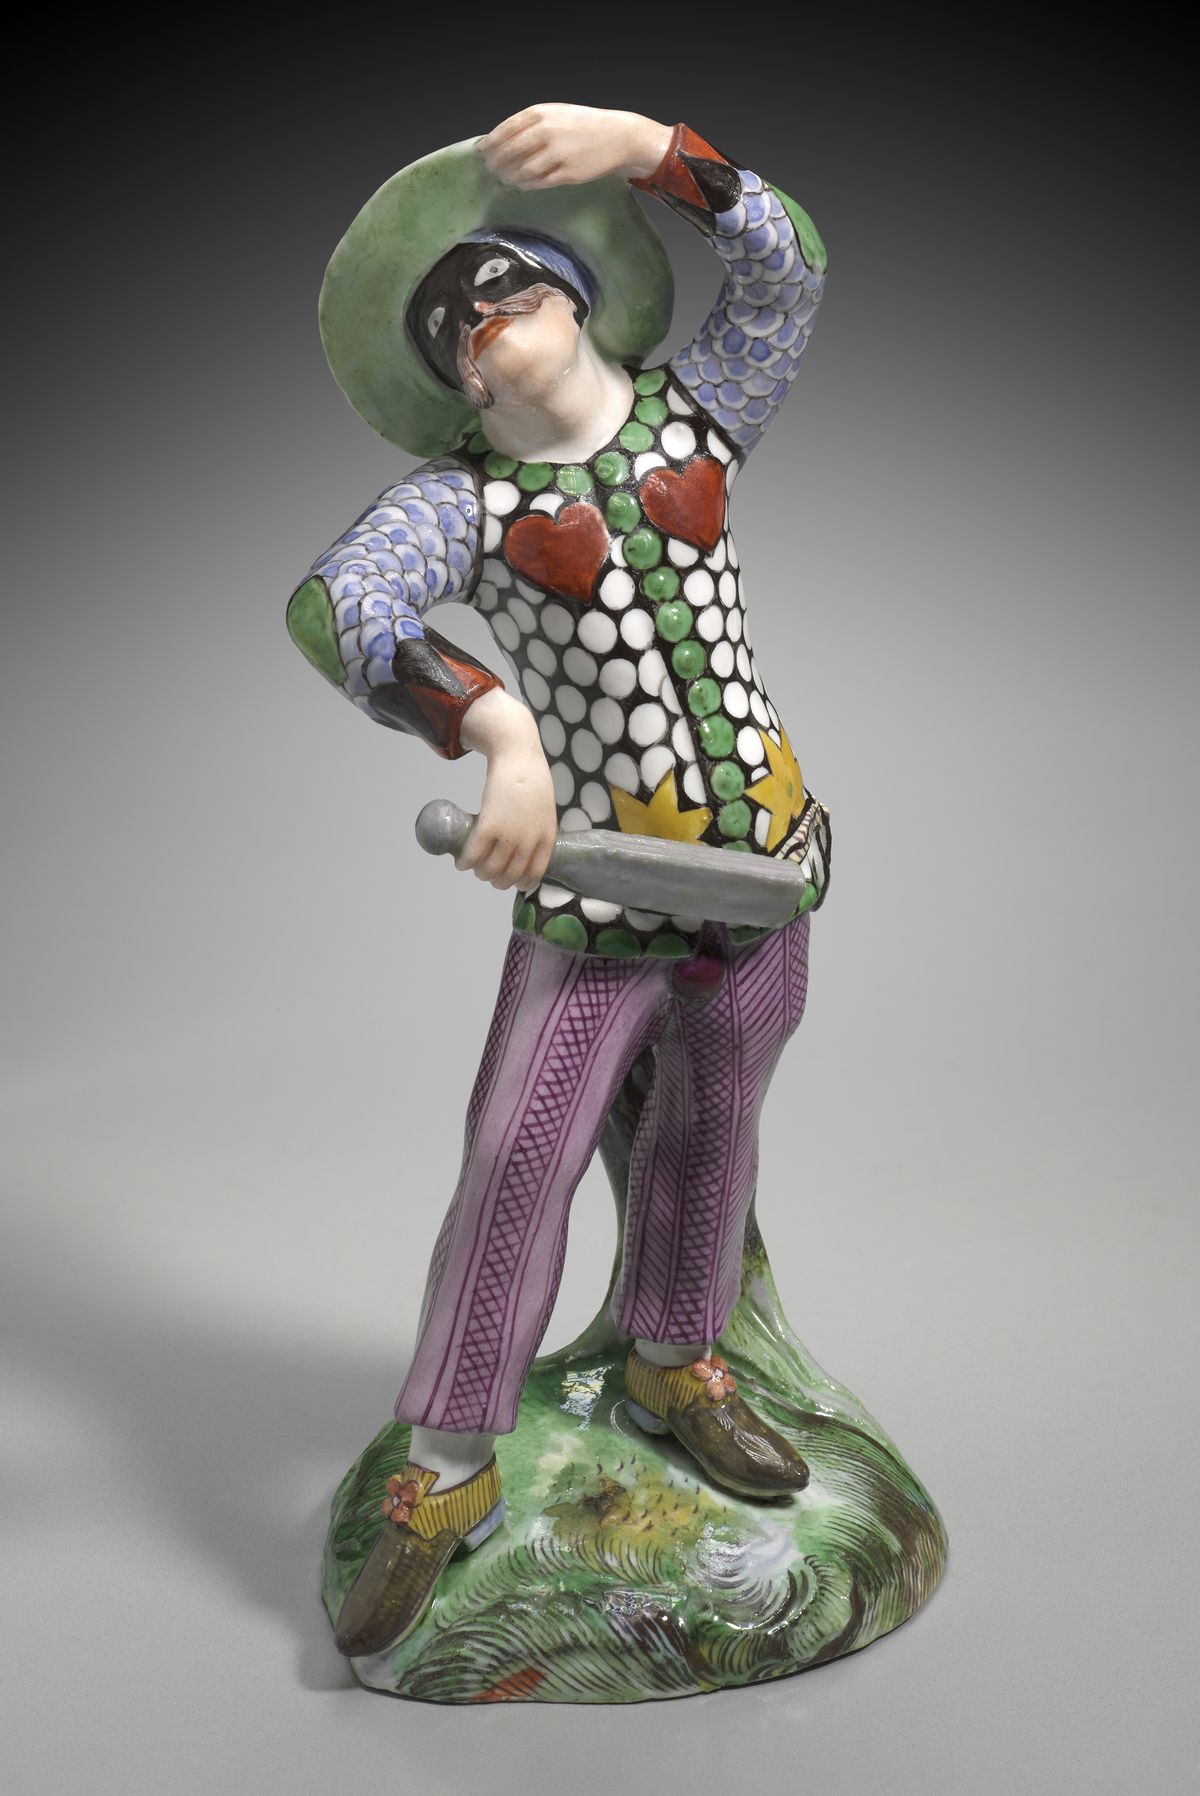 This 18th century figurine was one of several given to the MFA in Boston in recent years by art collectors in New York. Research revealed that the collection had belonged to Emma Budge, a Jewish woman living in Germany. The figurines were sold shortly after her death in 1937. The Nazis later prevented Budge’s heirs from collecting the money from the sale.  (Museum of Fine Arts Boston)